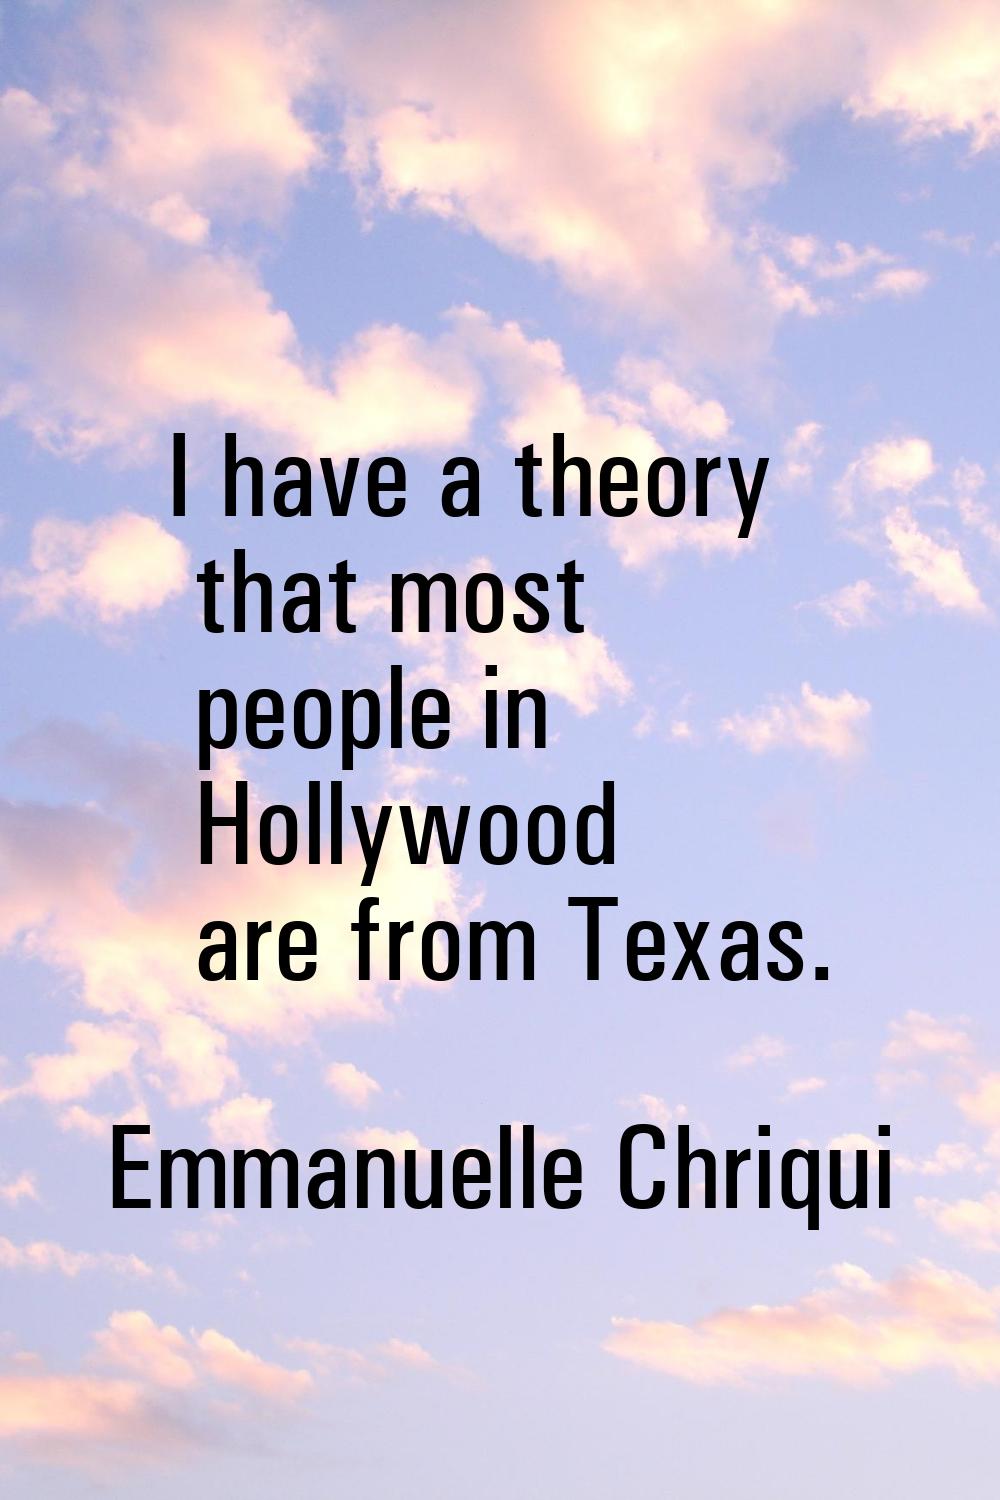 I have a theory that most people in Hollywood are from Texas.